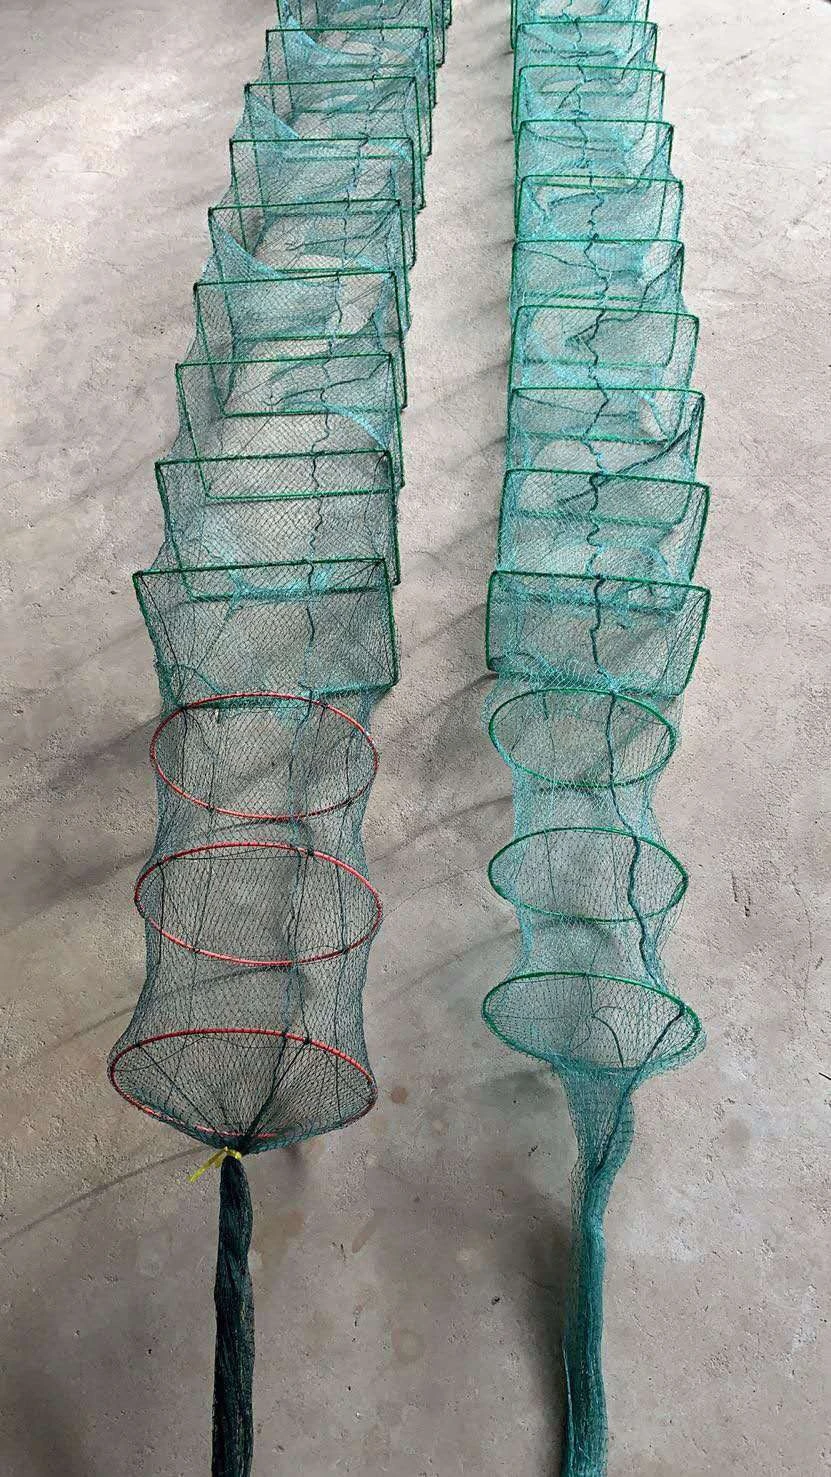 Buy China Supplier Hot Sale Fishing Net Fishing Trap For Catching Lobster  Fish Eel Shrimp from Anhui Weisa Fishing Tackle Co., Ltd., China